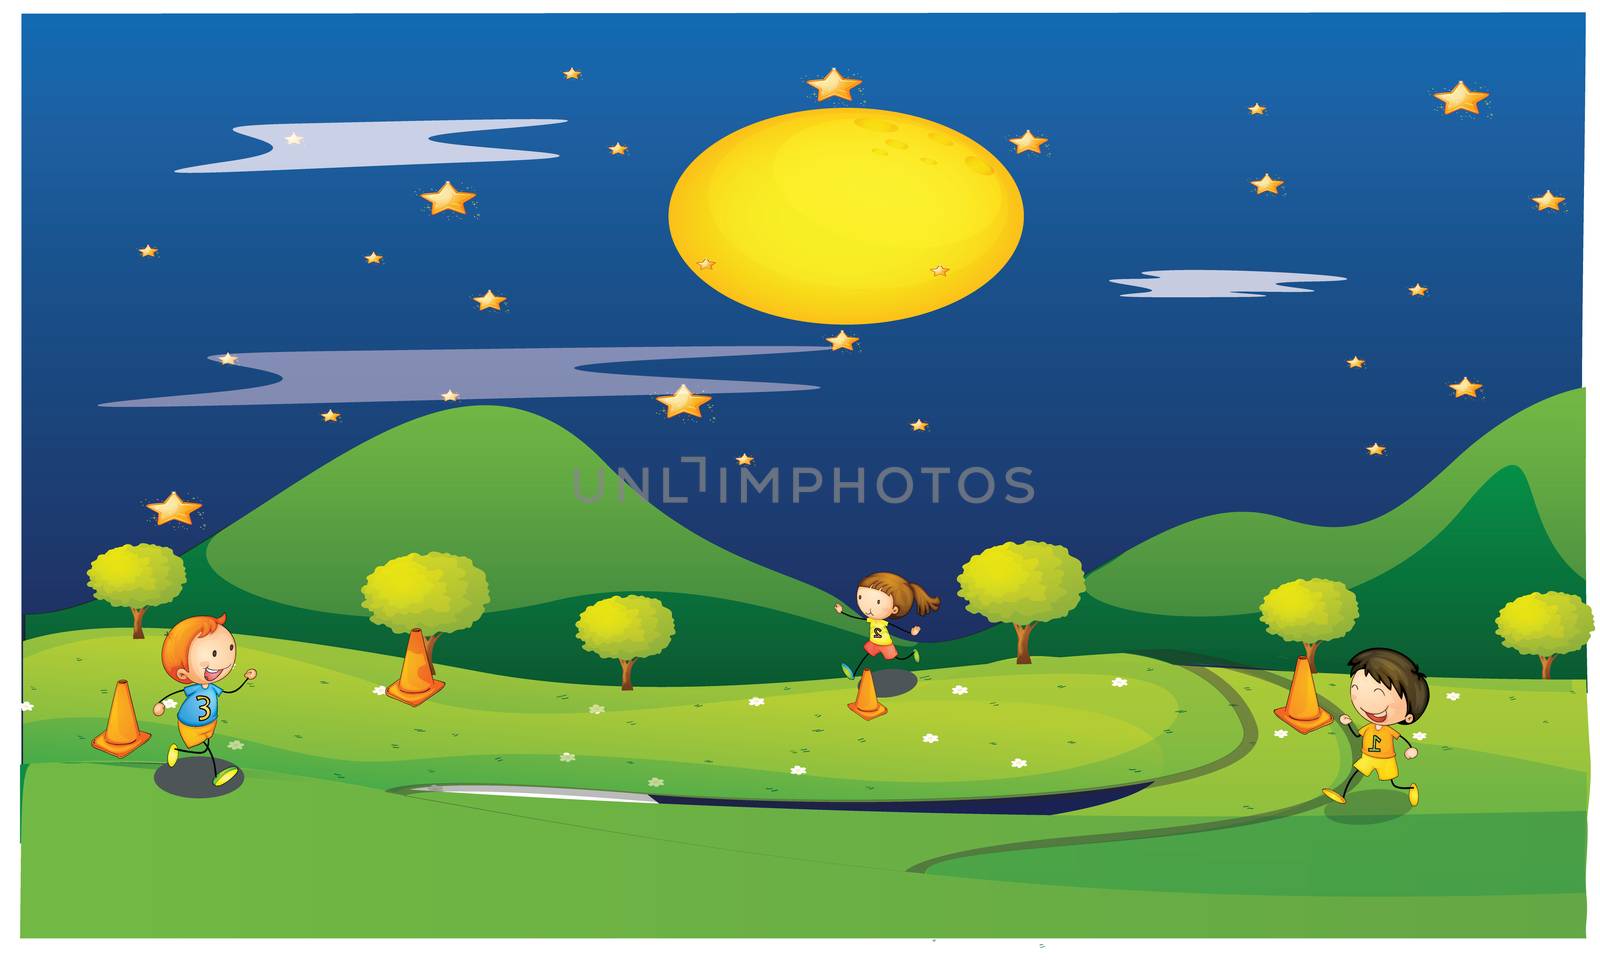 kids are playing in the garden in night sky